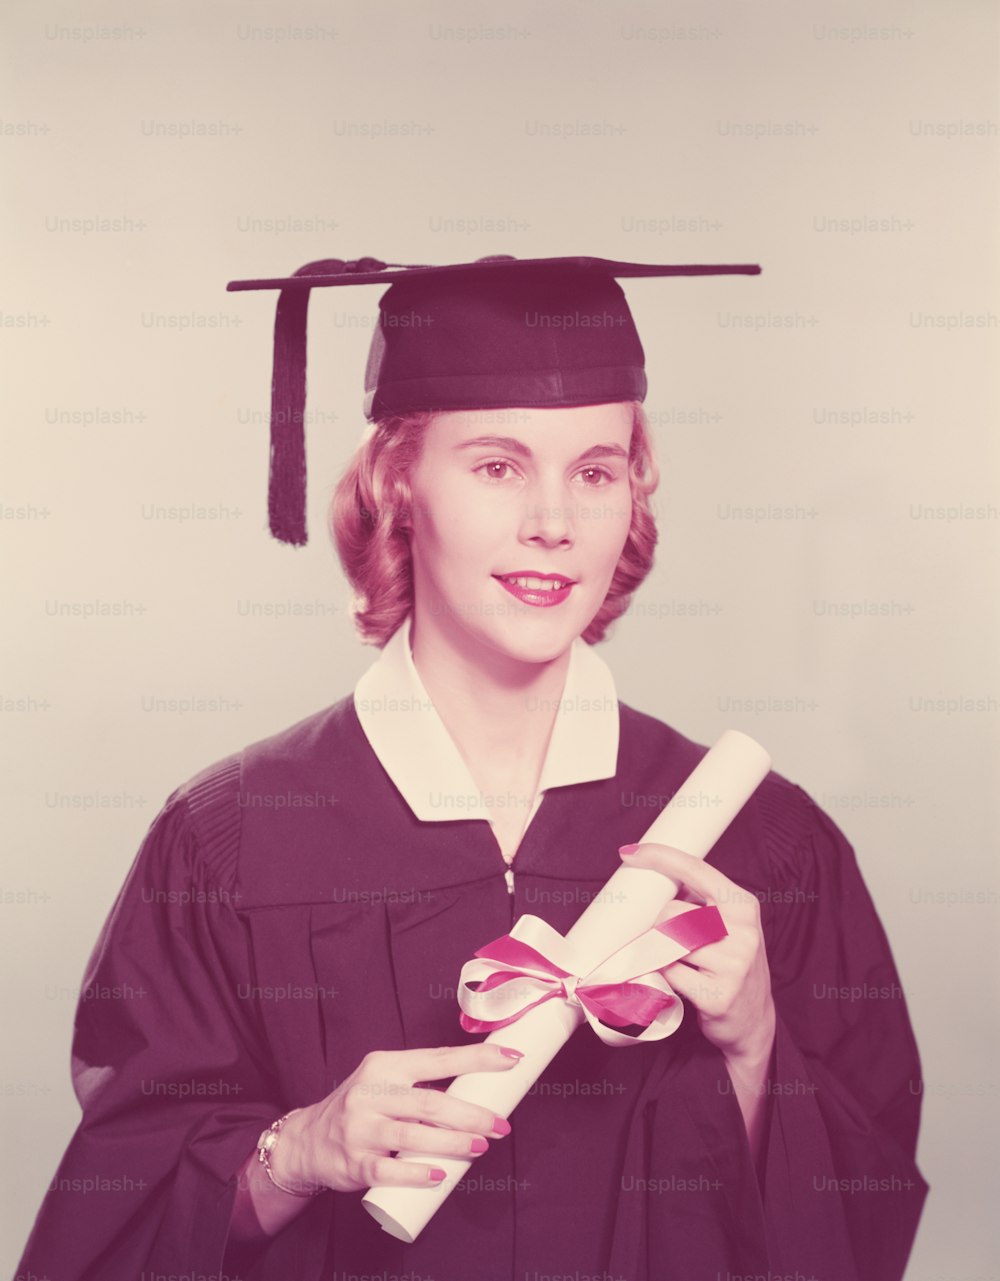 UNITED STATES - CIRCA 1950s:  Young woman wearing graduation robes and mortarboard, holding diploma tied with red and white ribbon.